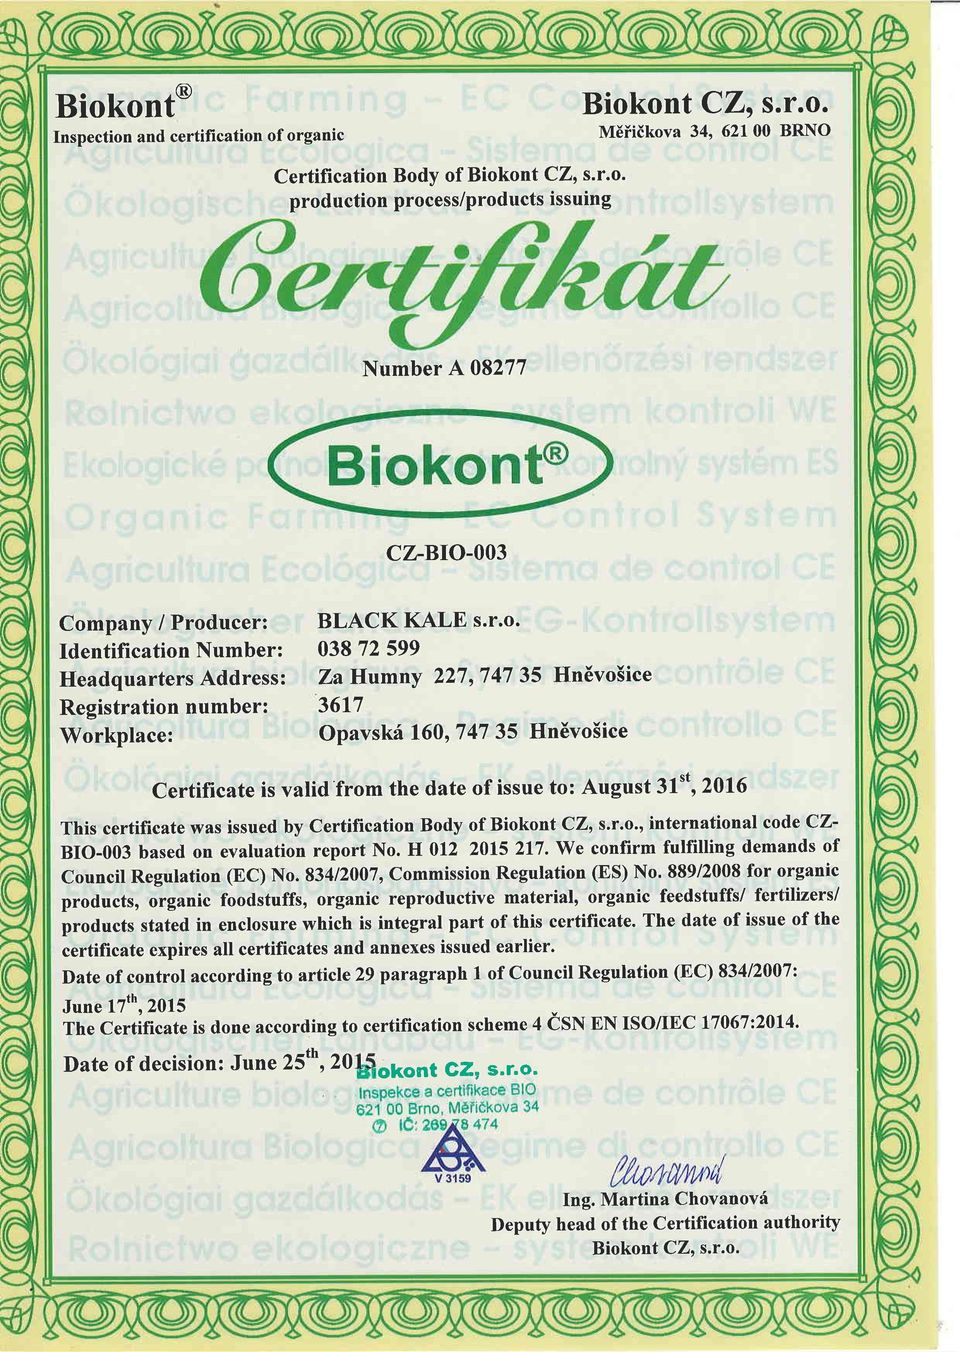 August 31't, 2016 This certificate was issued by Certification Body of Biokont CZ,, s.r.o., international code CZ- BIO-003 based on evaluation reportno. H 012 2015217.